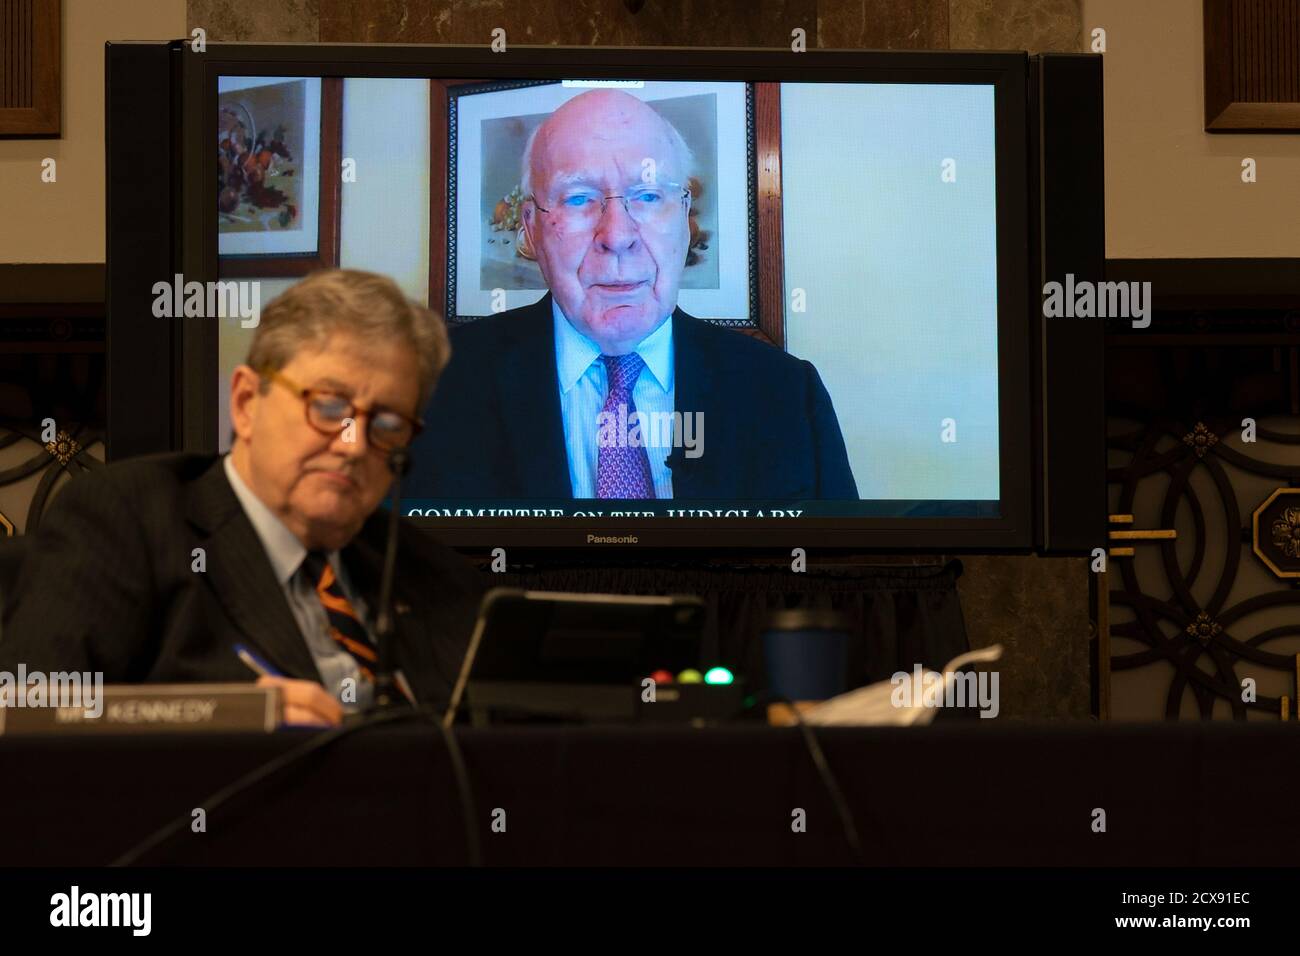 United States Senator Patrick Leahy (Democrat of Vermont), speaks remotely during a hearing in Washington, DC, U.S., on Wednesday, Sept. 30, 2020. The committee is exploring the Federal Bureau of Investigations investigation of the 2016 Trump campaign and Russian election interference. US Senator John Neely Kennedy (Republican of Louisiana) is in the foreground at left.Credit: Stefani Reynolds/Pool via CNP /MediaPunch Stock Photo